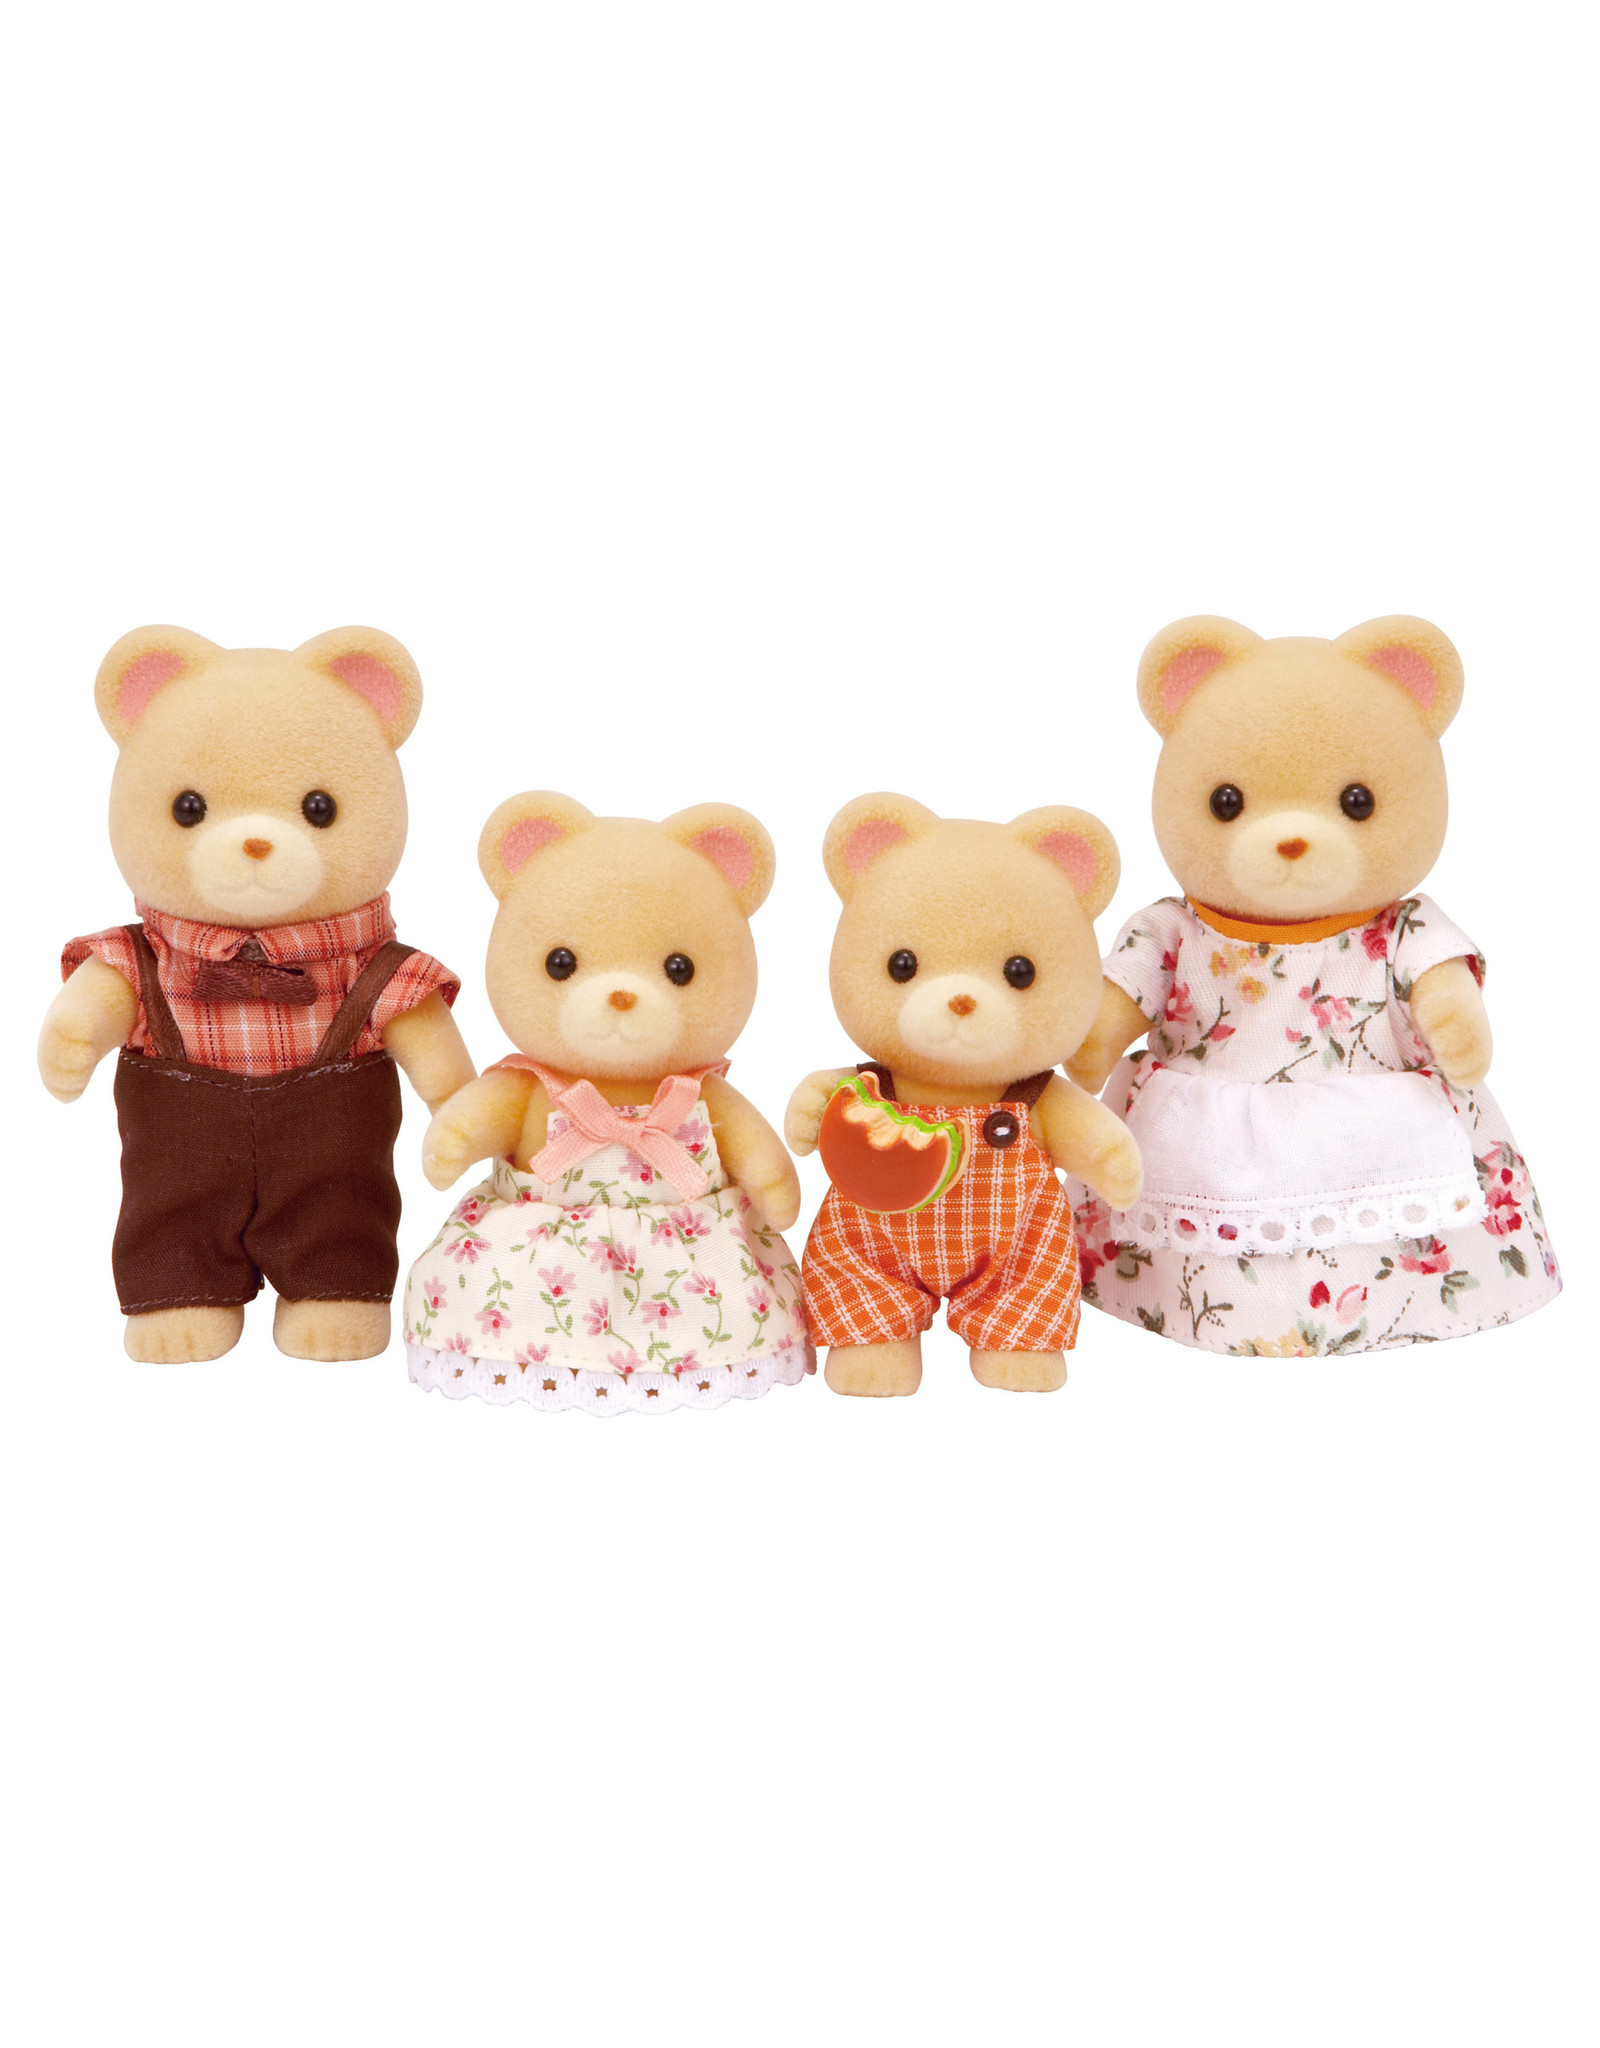 Calico Critters Calico Critters Cuddle Bear Family